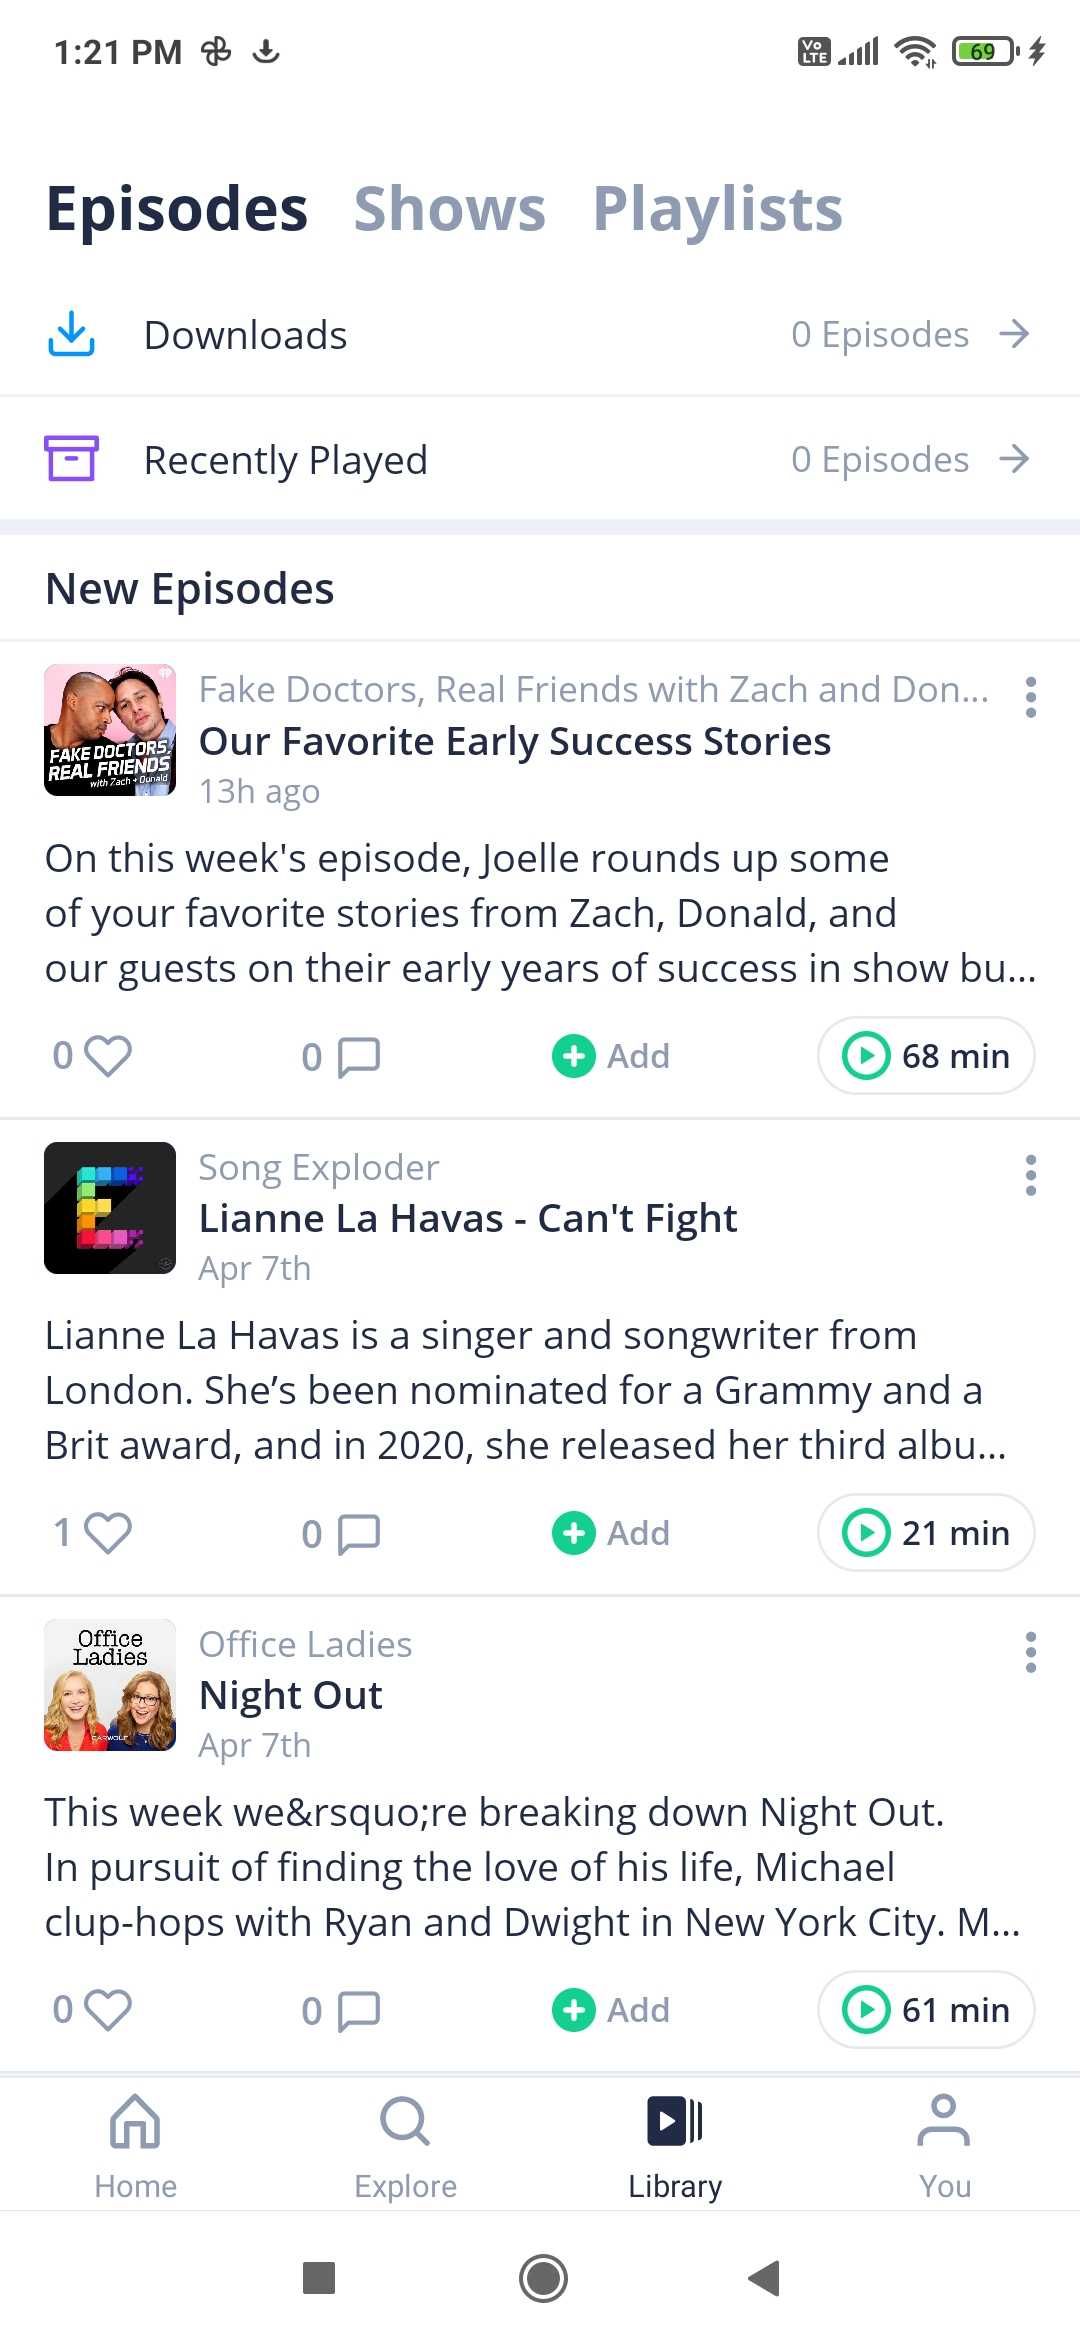 Repod lets you follow podcasts and listen to episodes like any podcast app